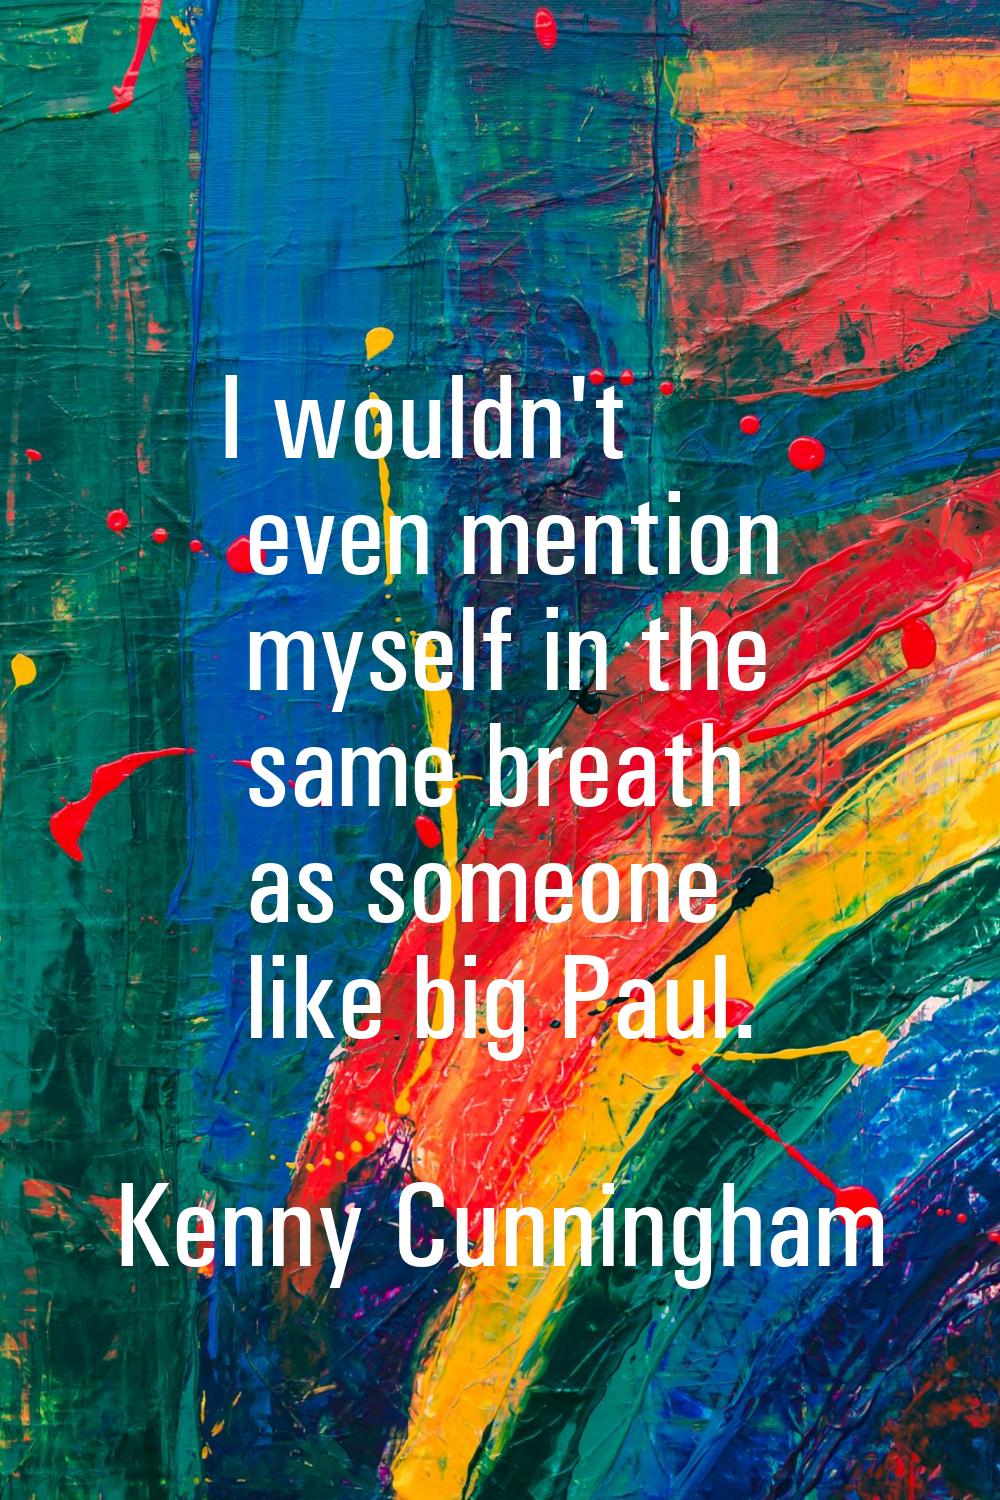 I wouldn't even mention myself in the same breath as someone like big Paul.